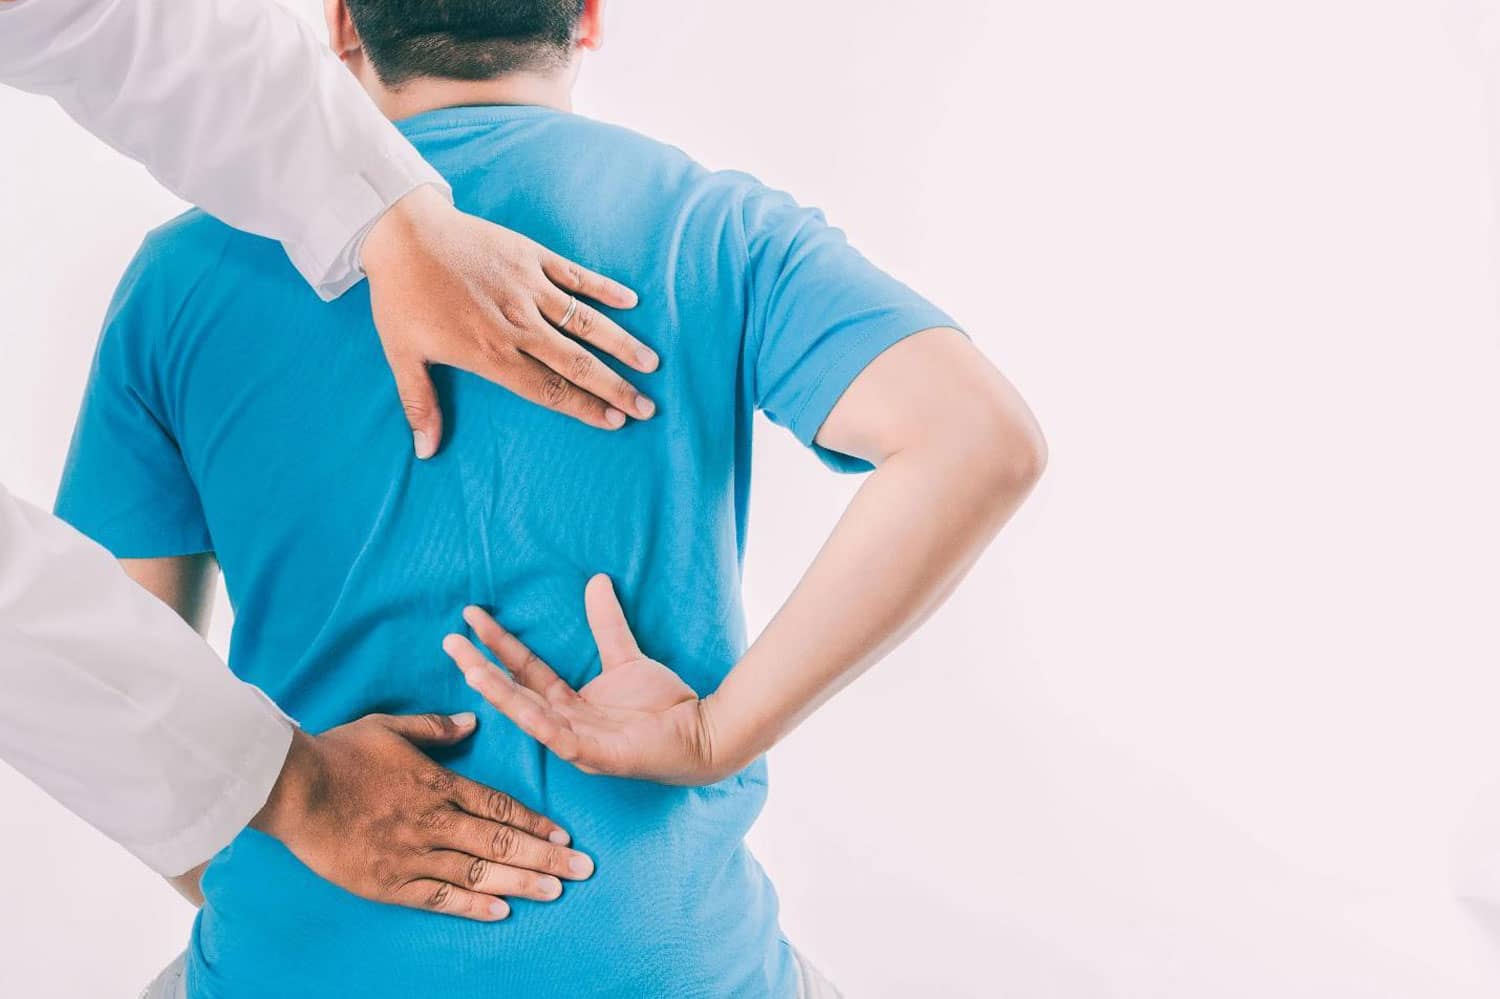 A man points to where his back hurts, during a chiropractic exam.